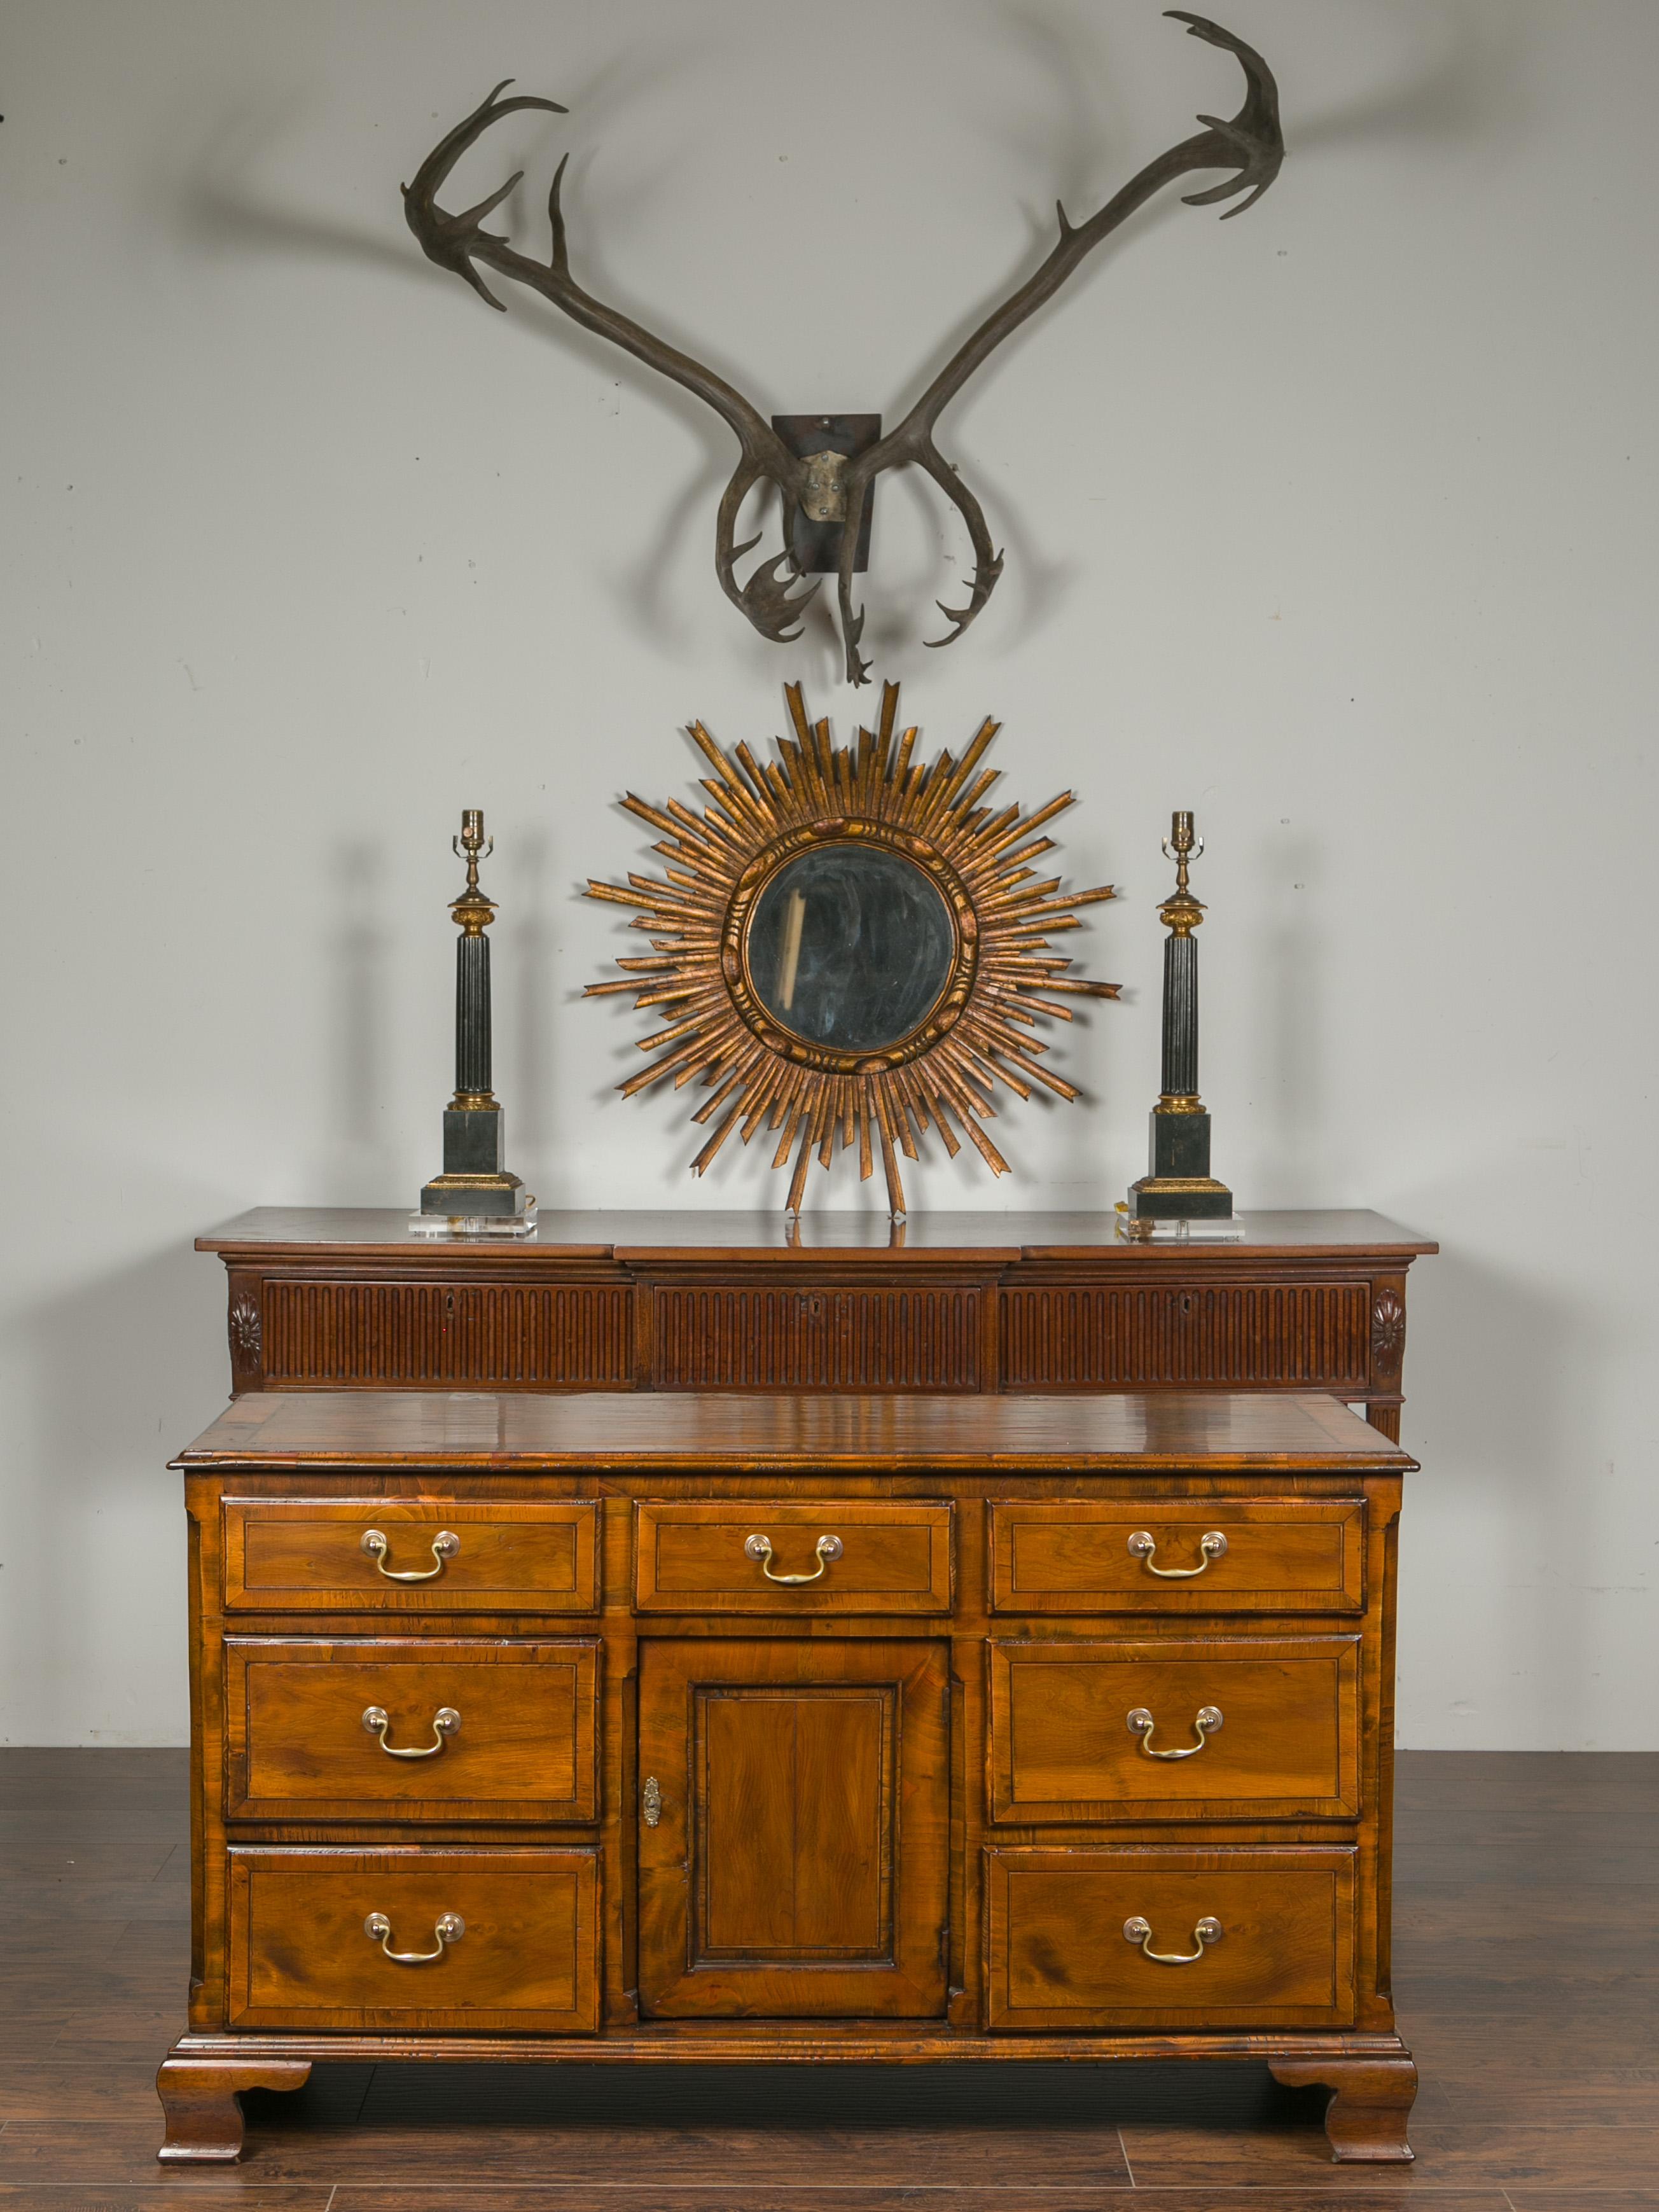 An English Georgian period oak dresser base / server from the early 19th century, with seven drawers, single door and ogee bracket feet. Created in England during the early years of the 19th century, this long oak server features a rectangular top